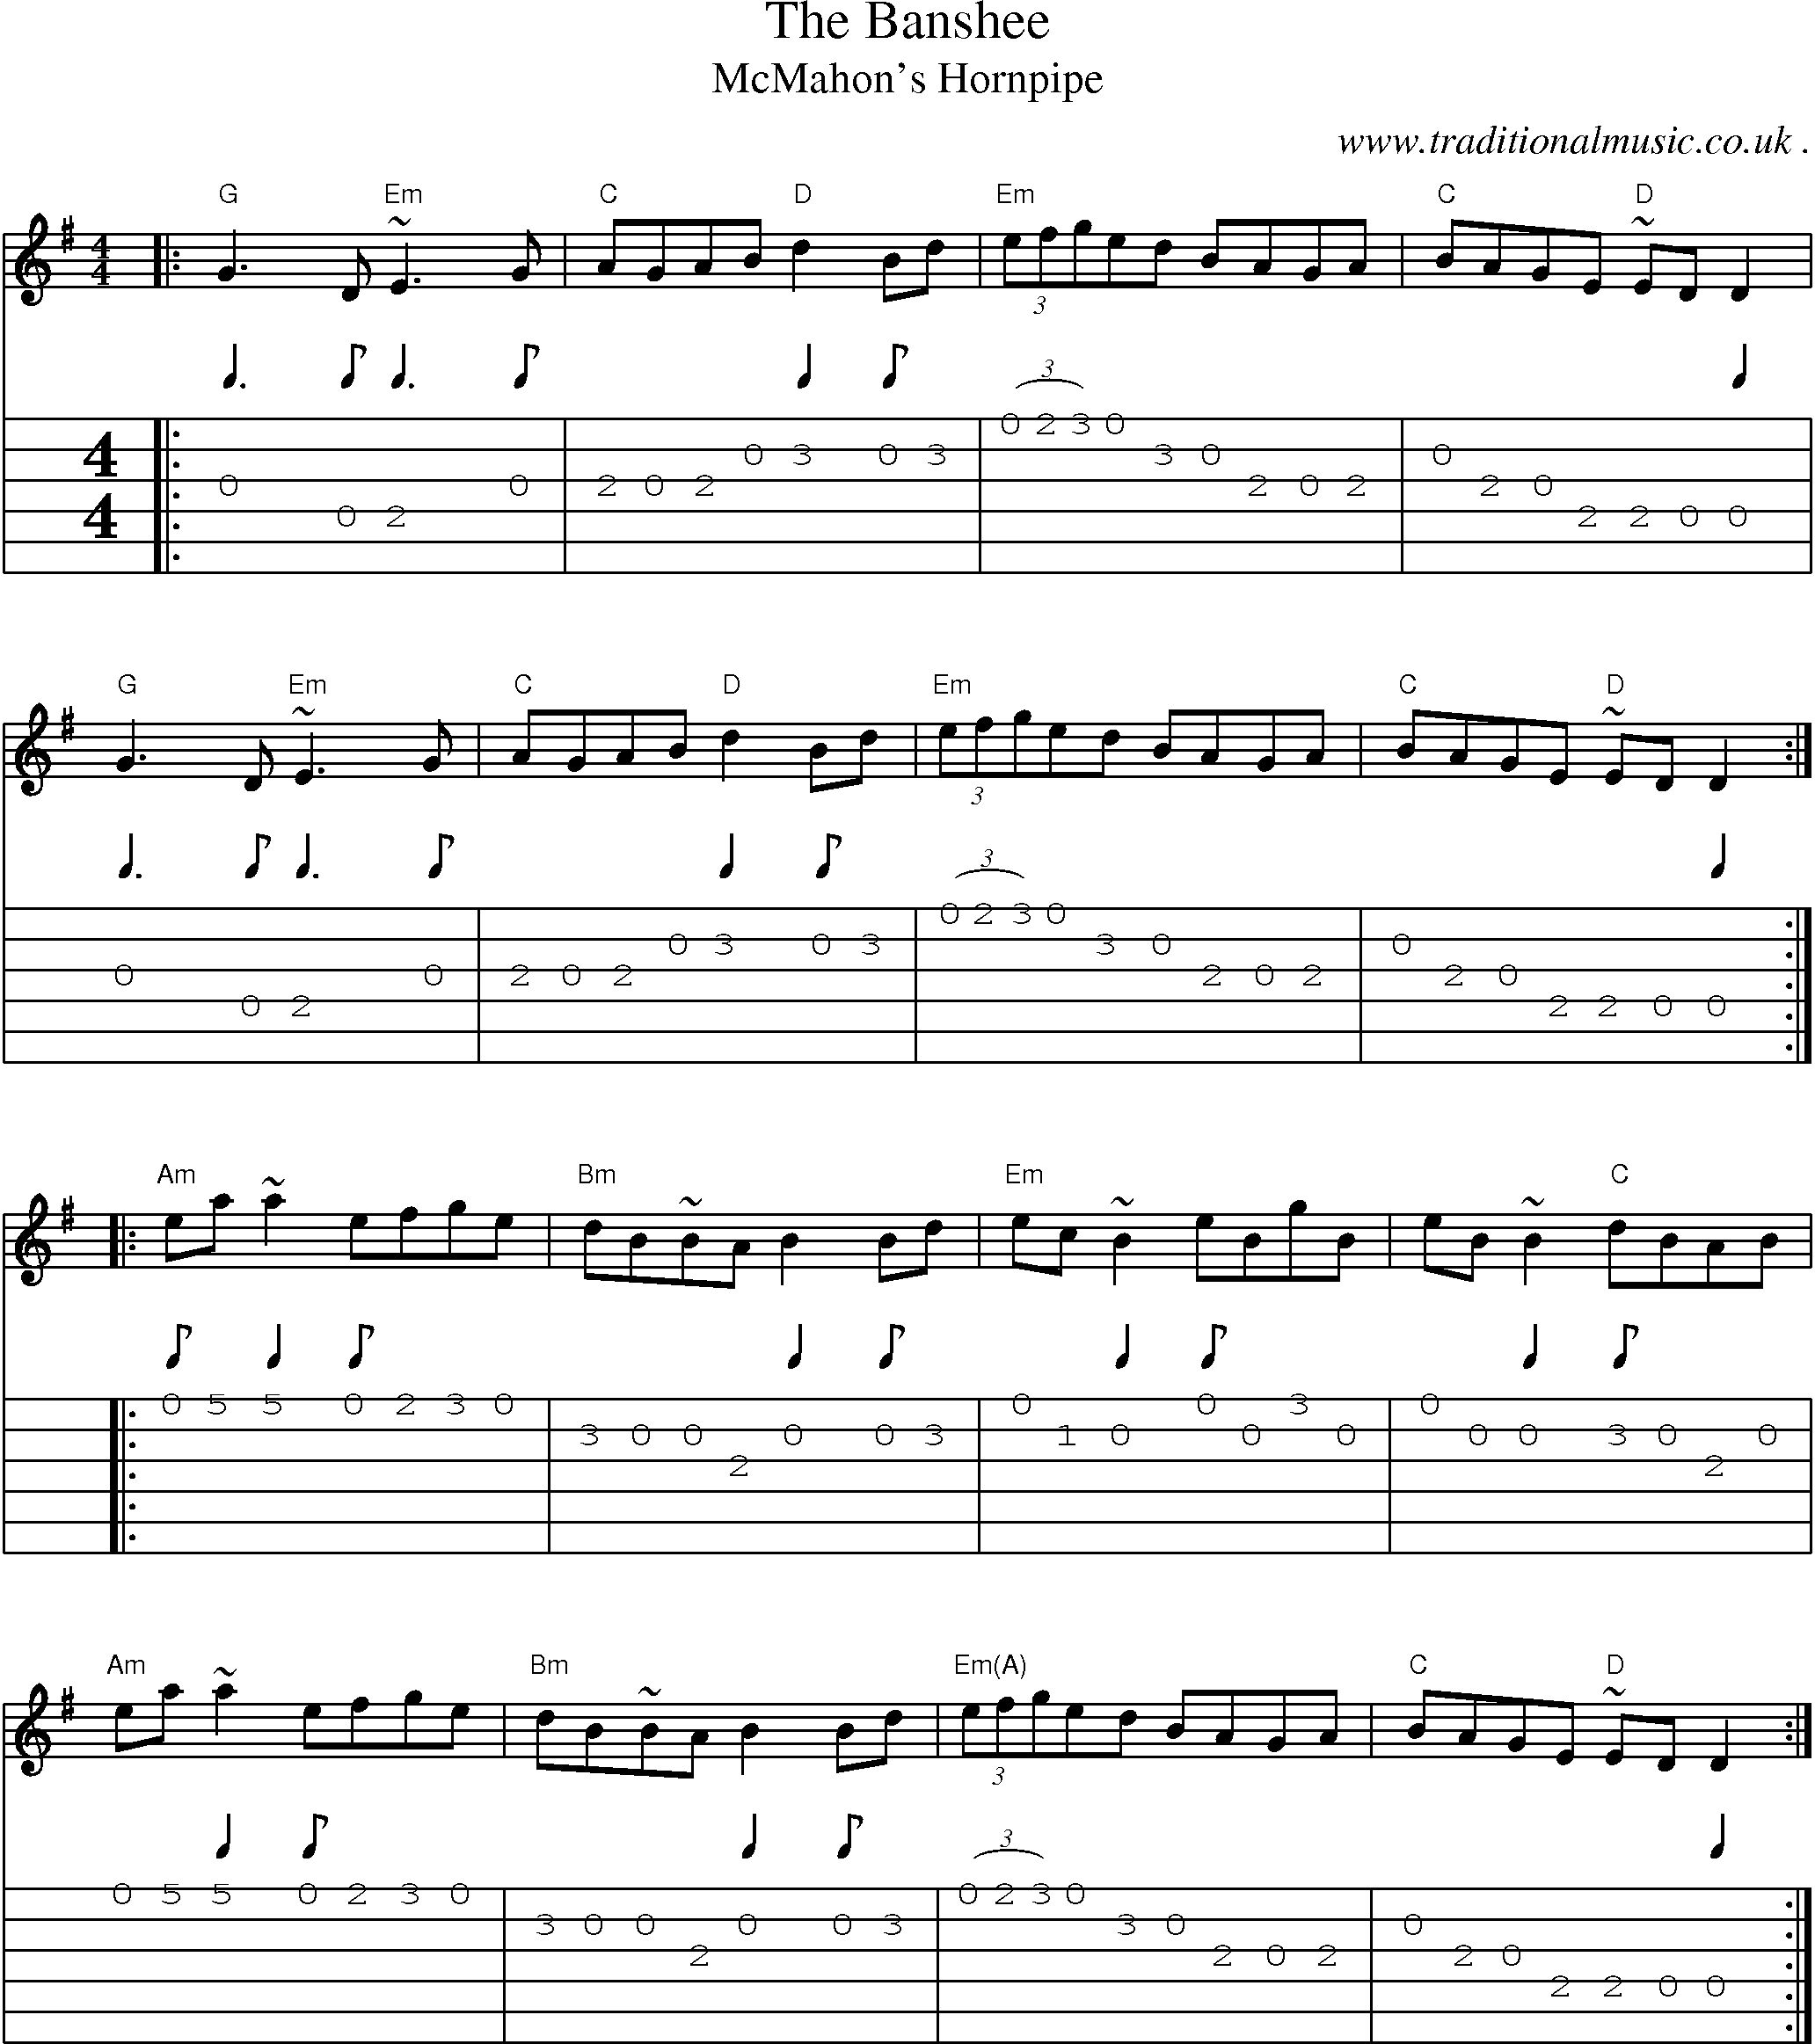 Music Score and Guitar Tabs for The Banshee